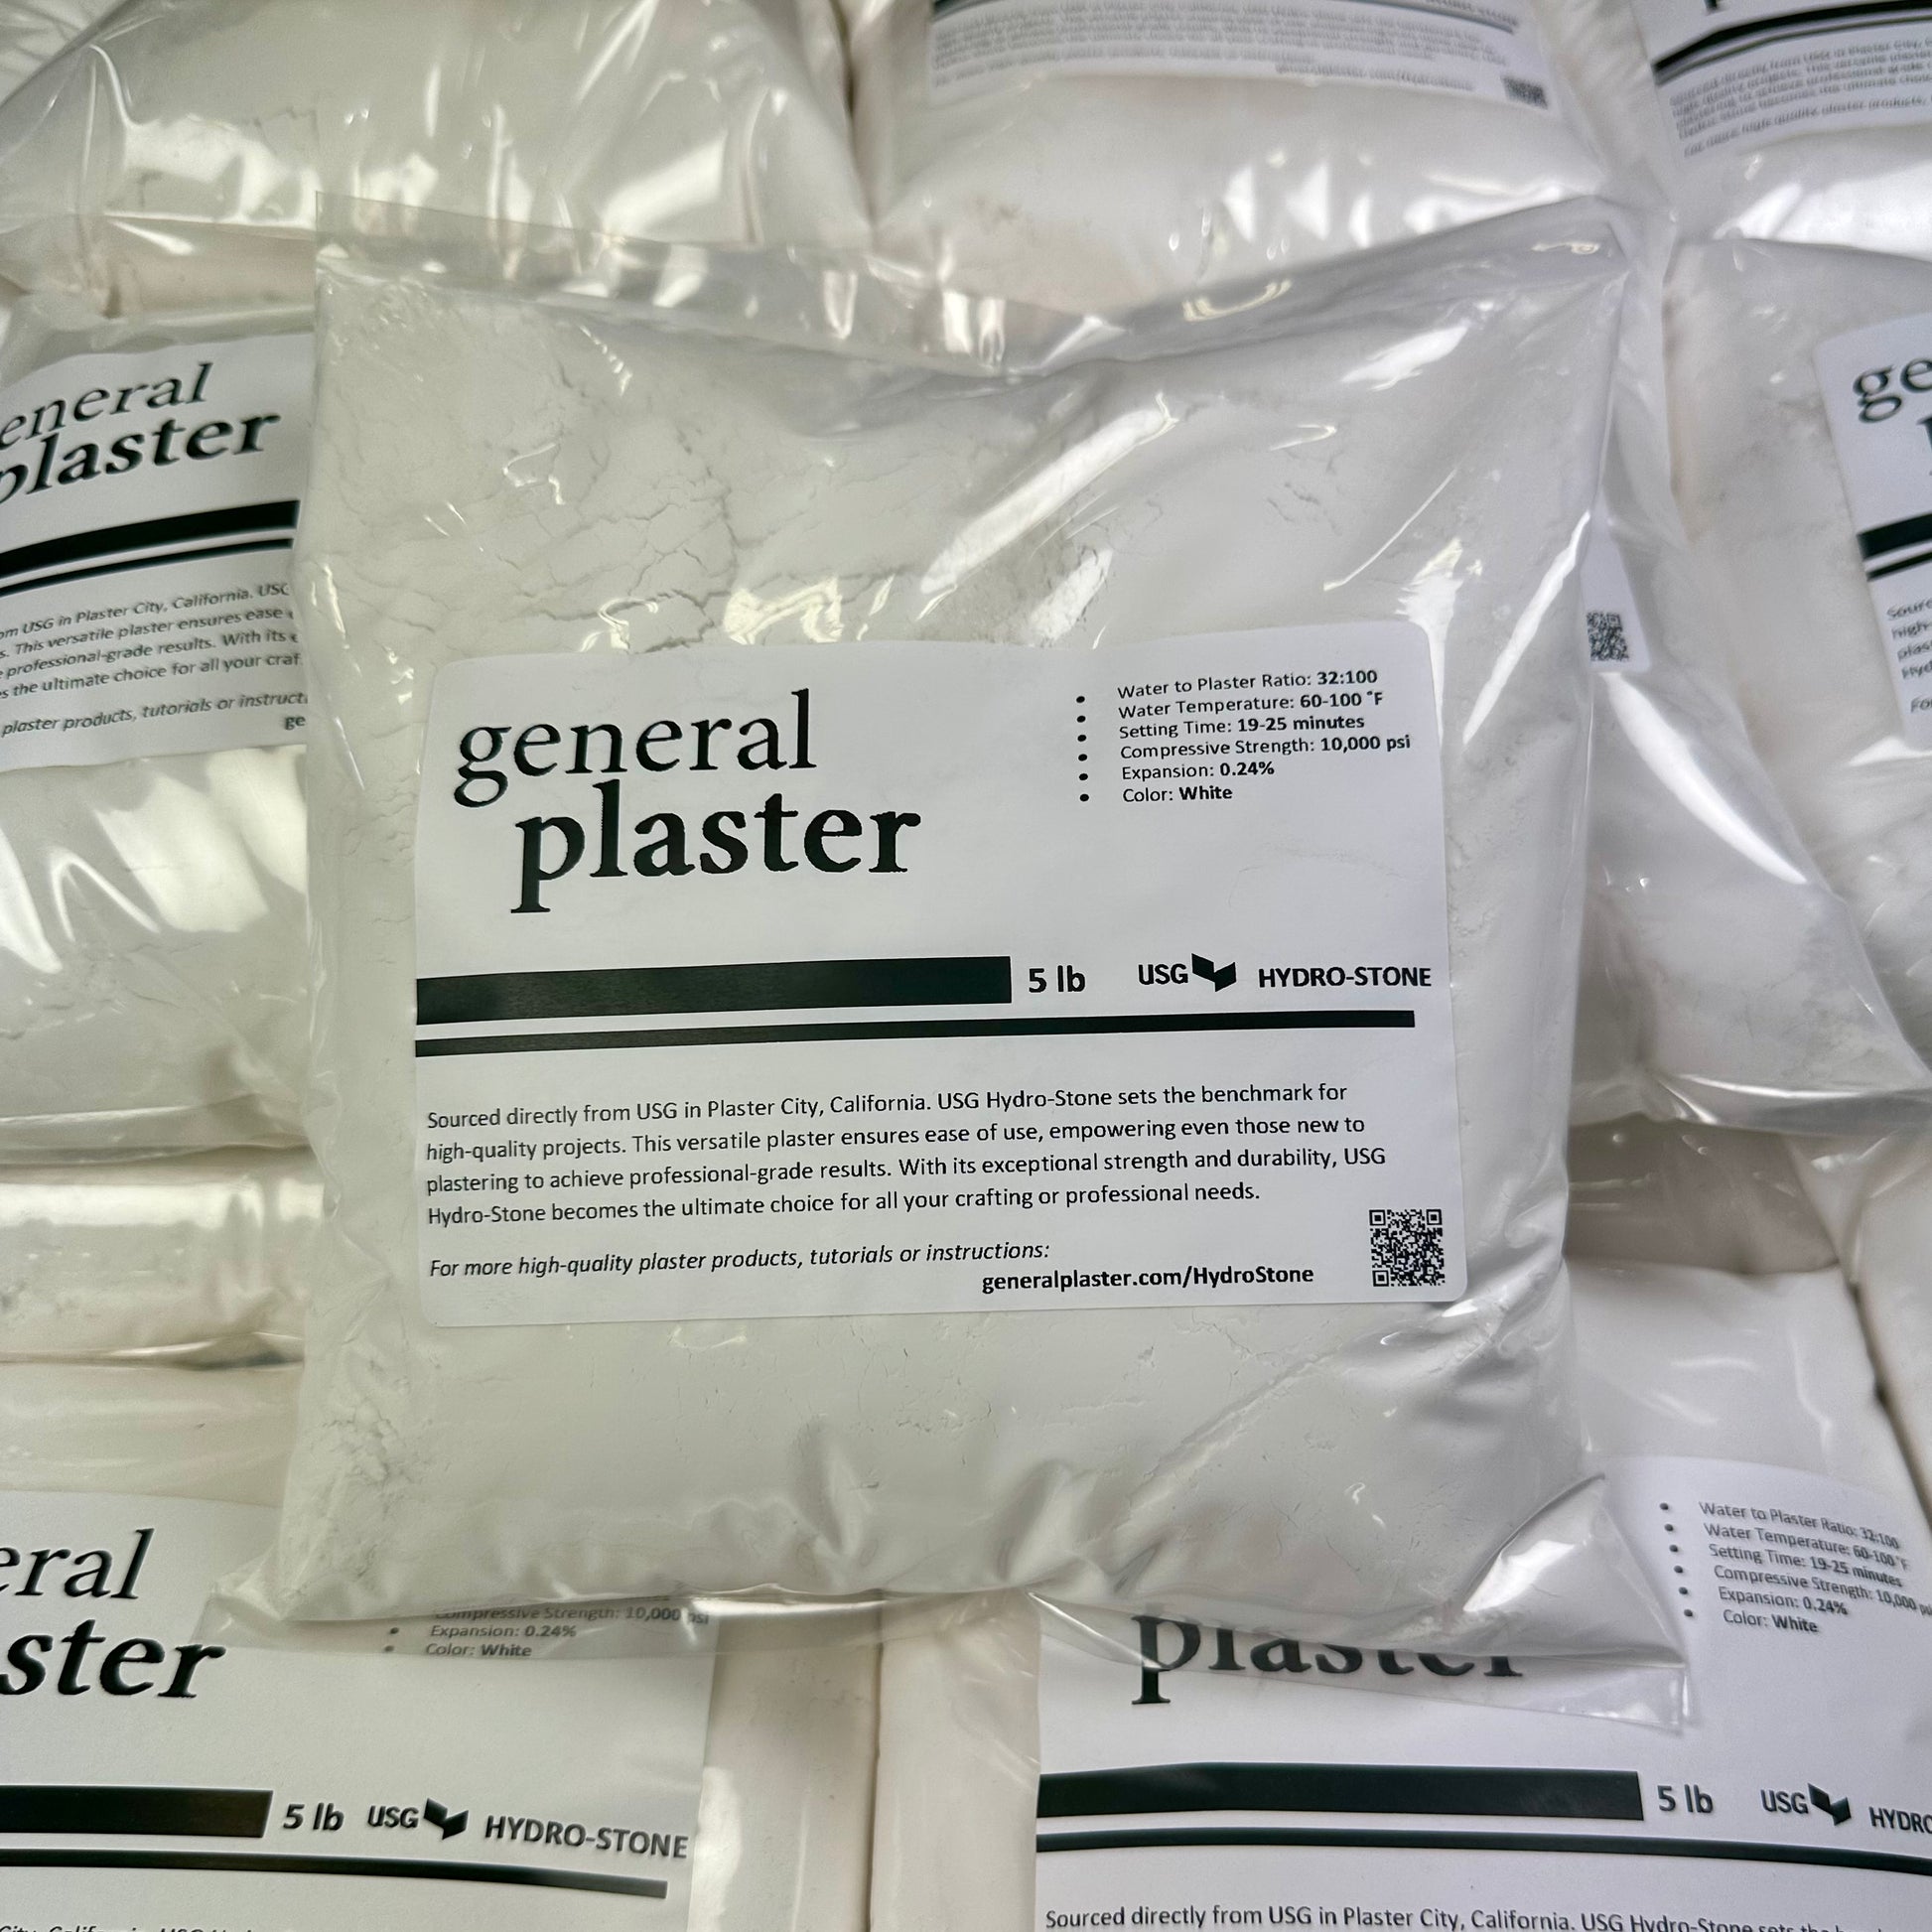 A 5lb sealed bag of USG HYDRO-STONE as sold by us at GP General Plaster.